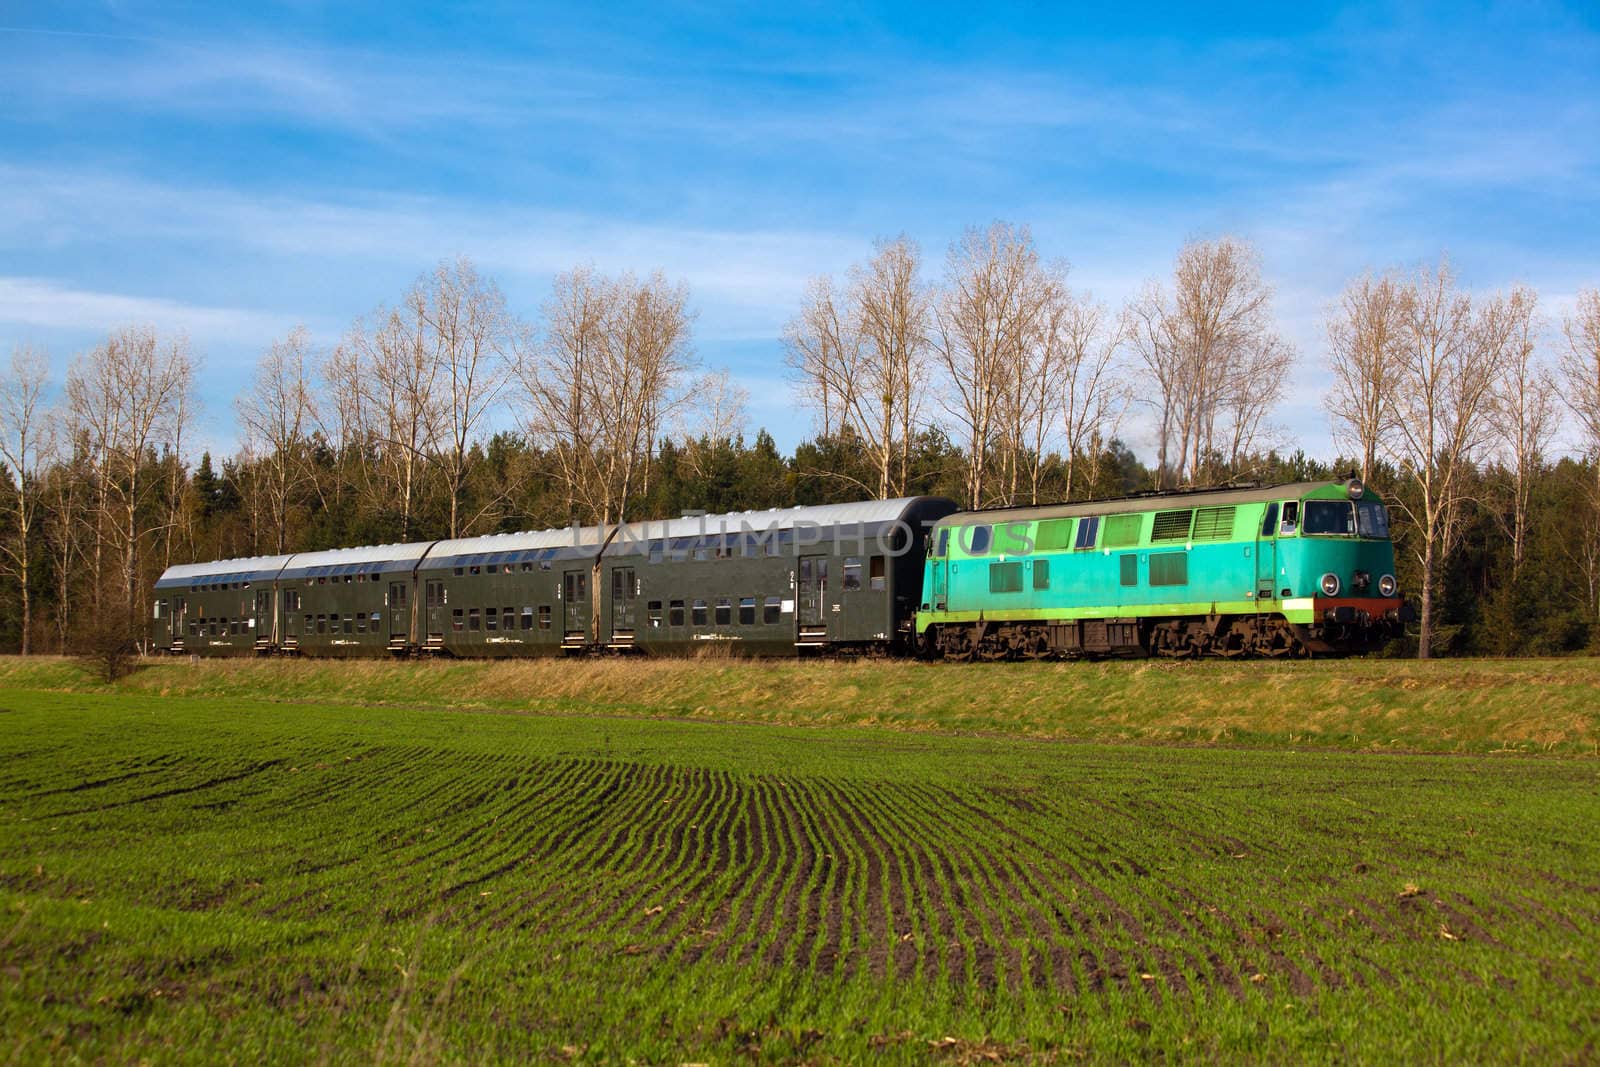 Passenger train passing through countryside by remik44992